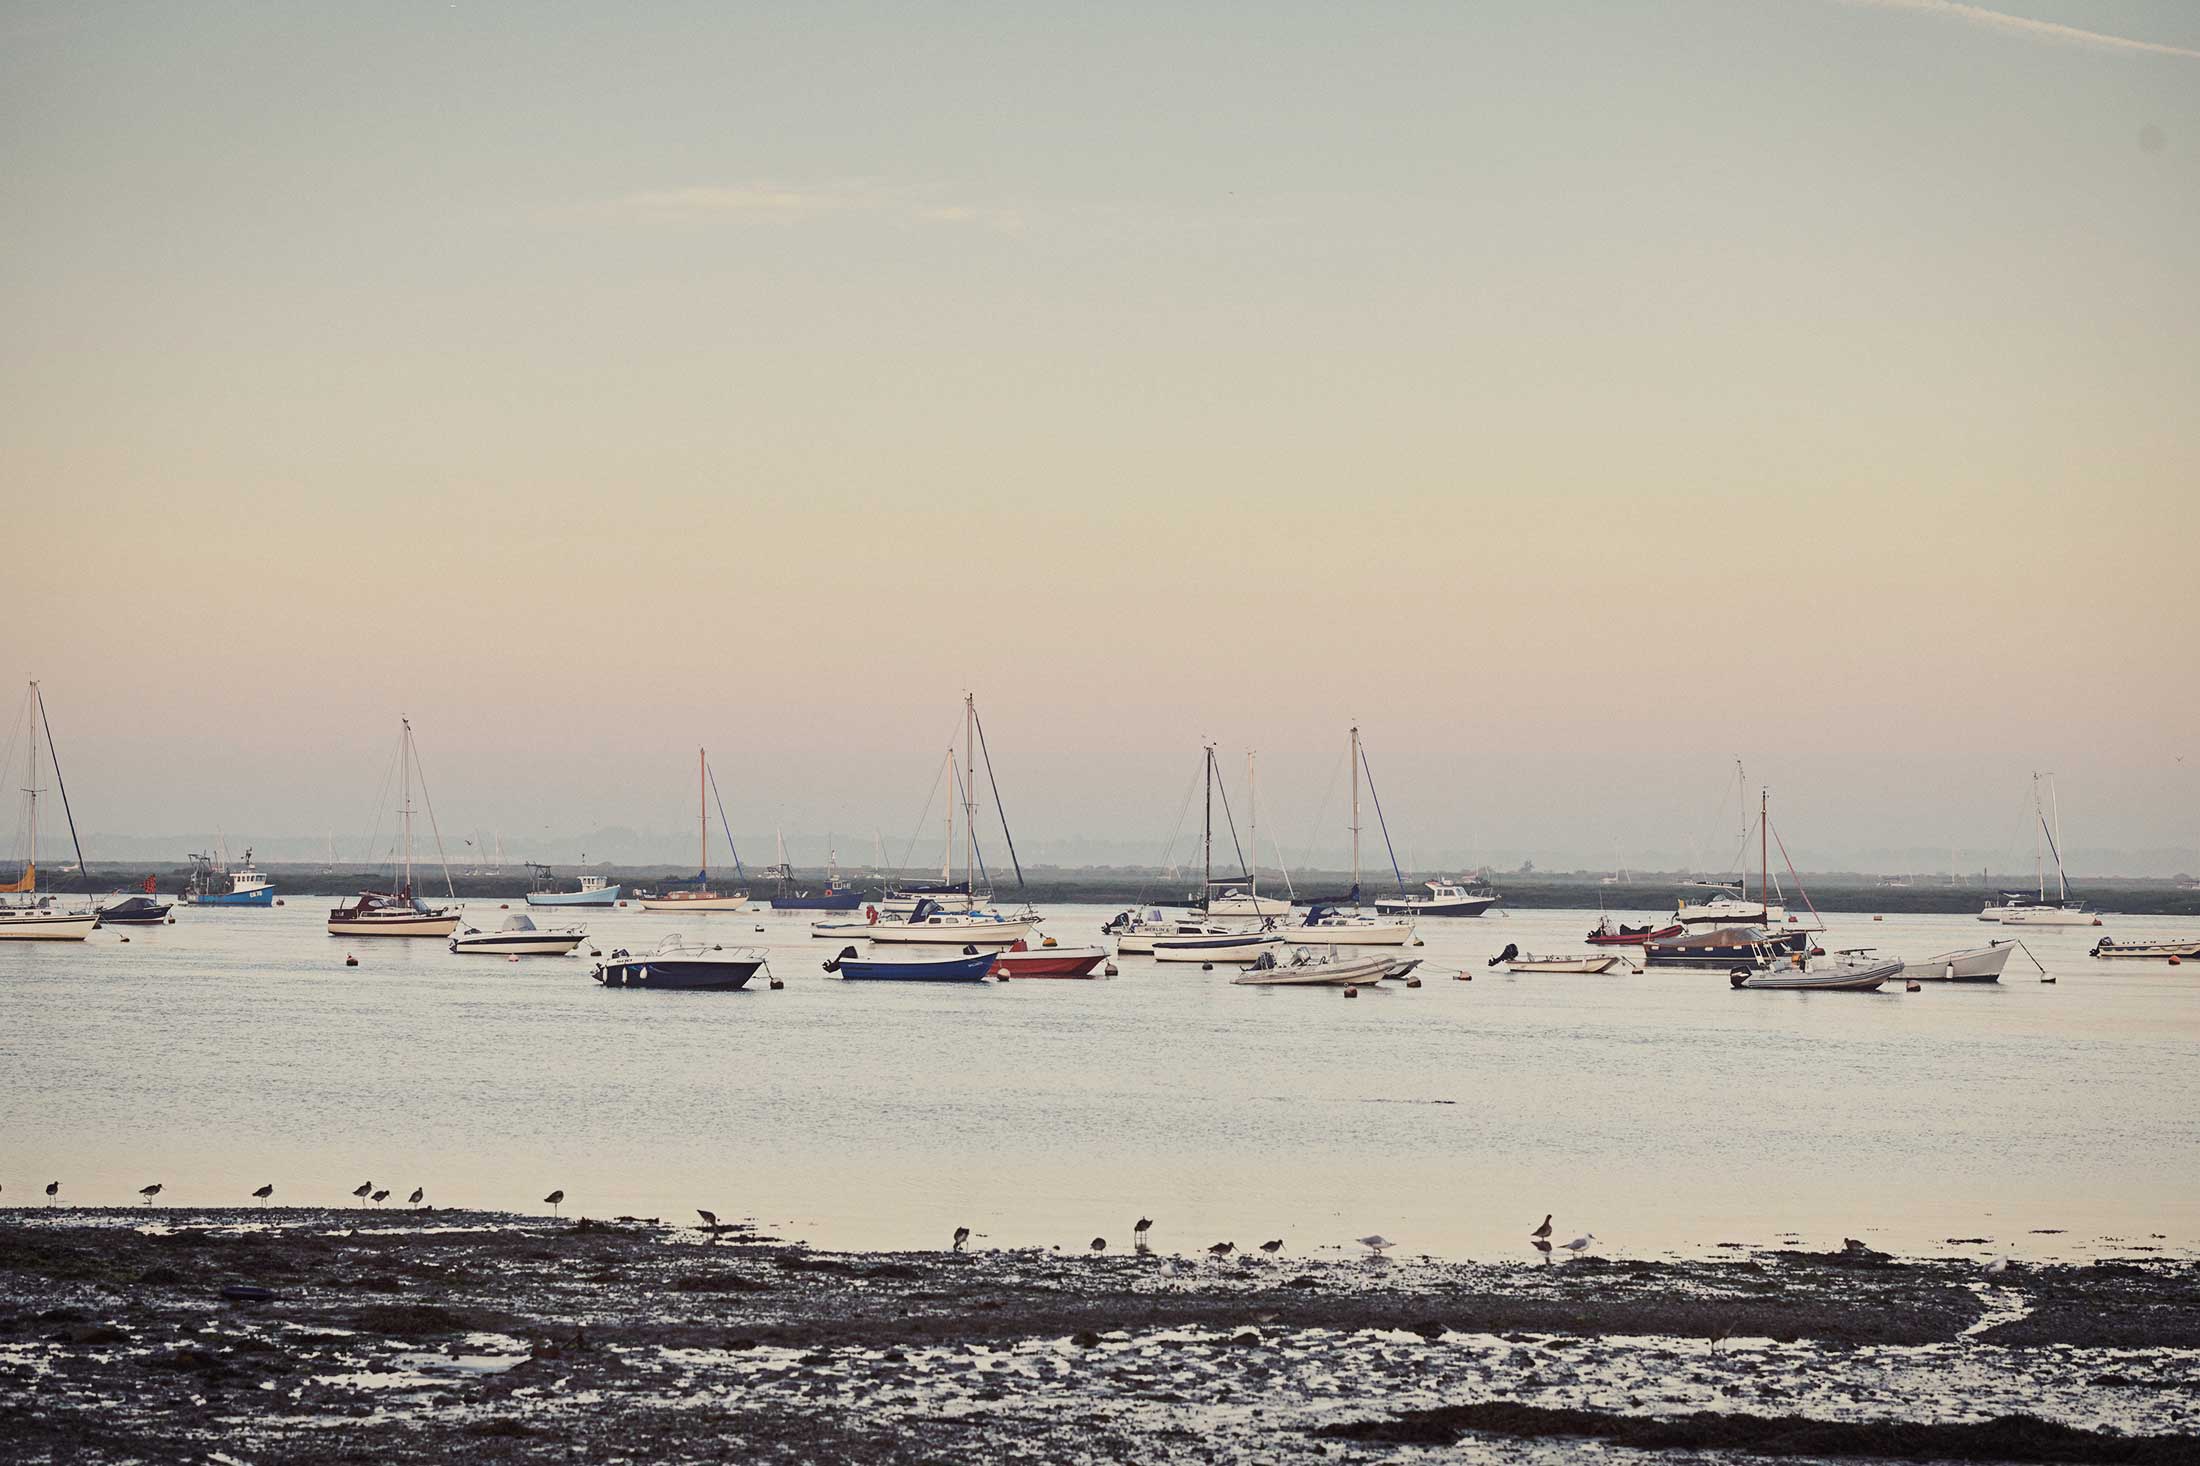 Boats in harbour at sunset - Mersea Island - Beresfords Estate agents - Essex